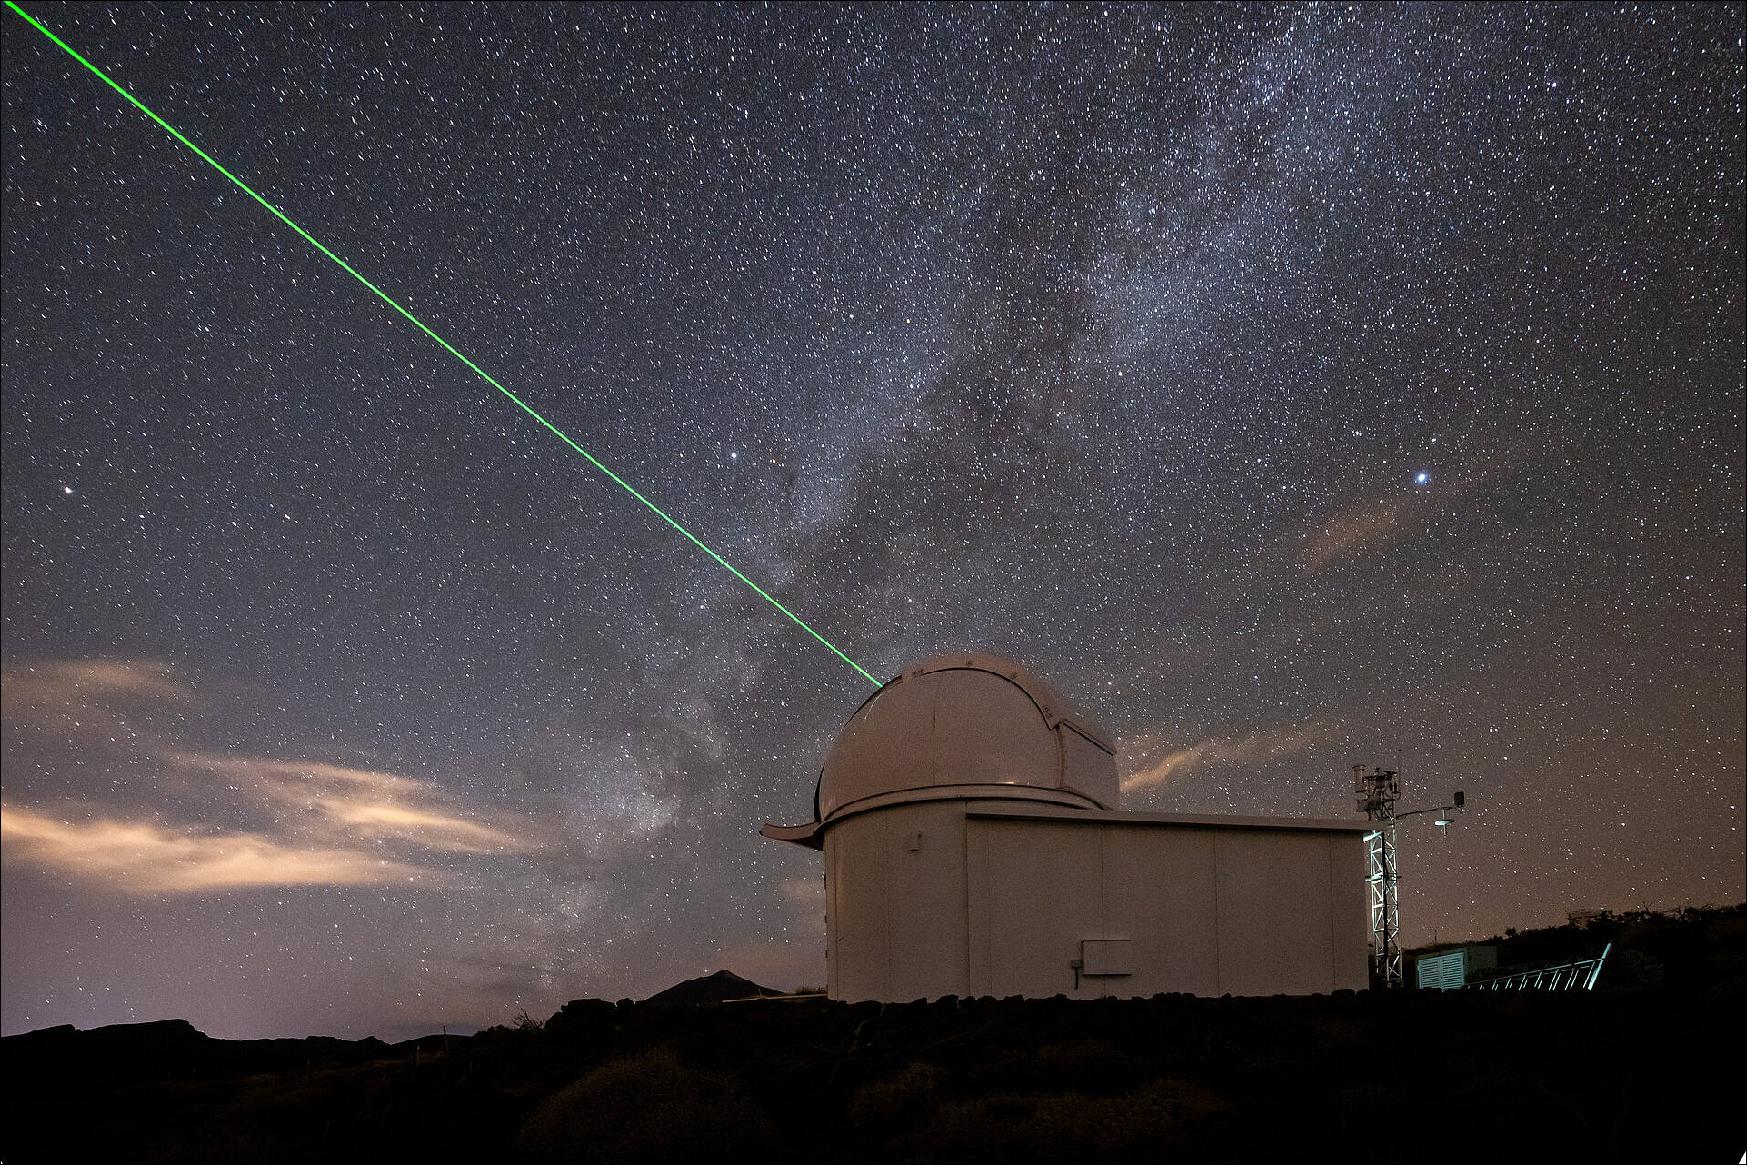 Figure 1: ESA's IZN-1 laser ranging station on top of the Izaña mountain in Tenerife, Spain, has recently undergone months of testing and commissioning, passing its final tests with flying colours. As it reached ‘station acceptance’, it was handed over to ESA from the German company contracted to build it, DiGOS. The station is a technology test bed and a vital first step in making debris mitigation widely accessible to all space actors with a say in the future of our space environment (image credit: ESA)